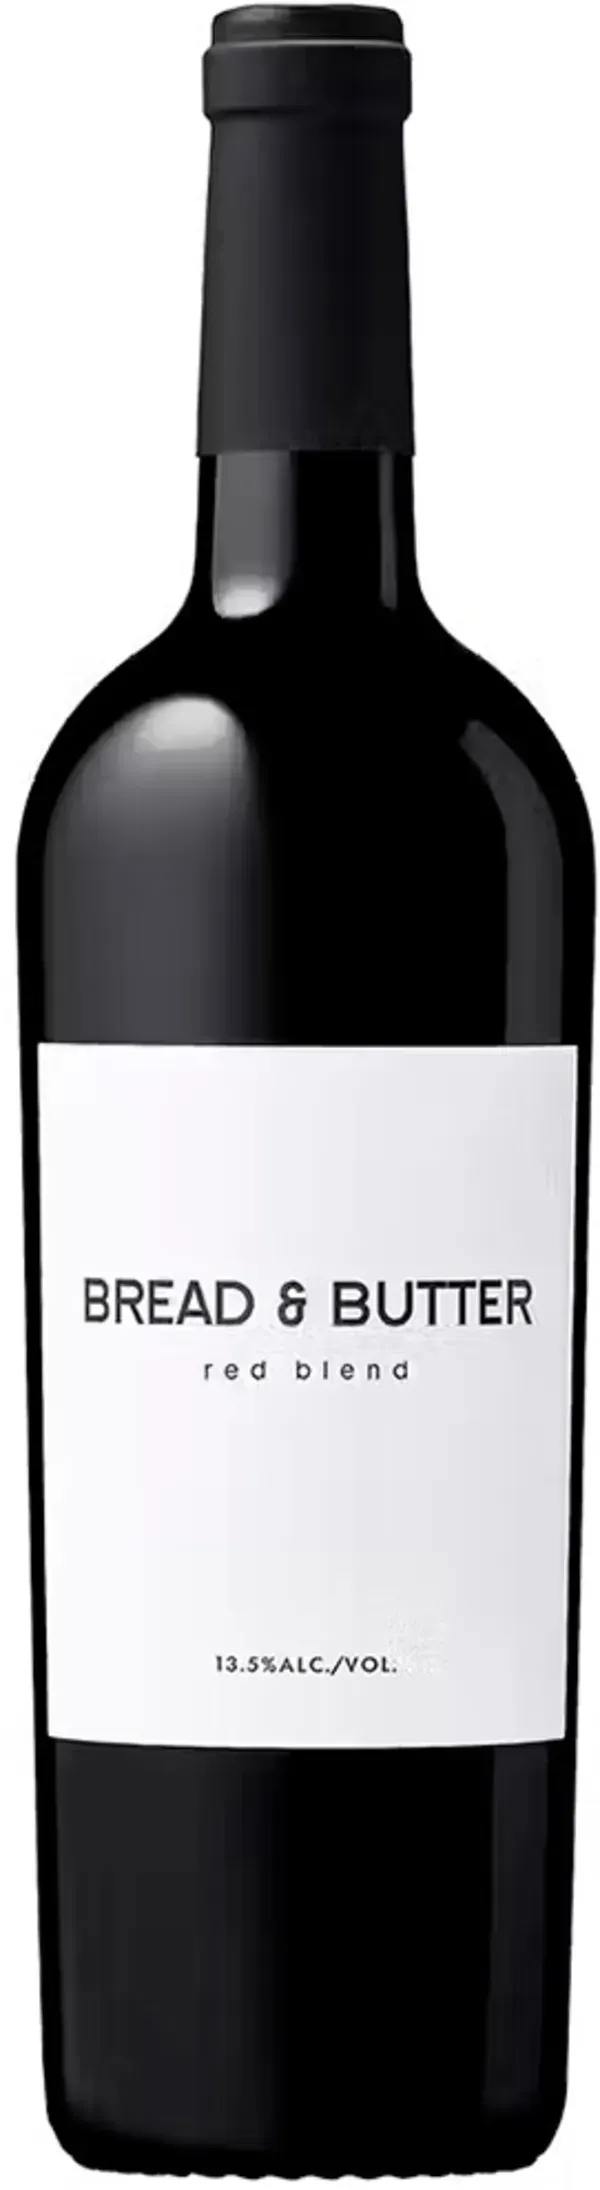 Bottle of Bread & Butter Red Blend from search results